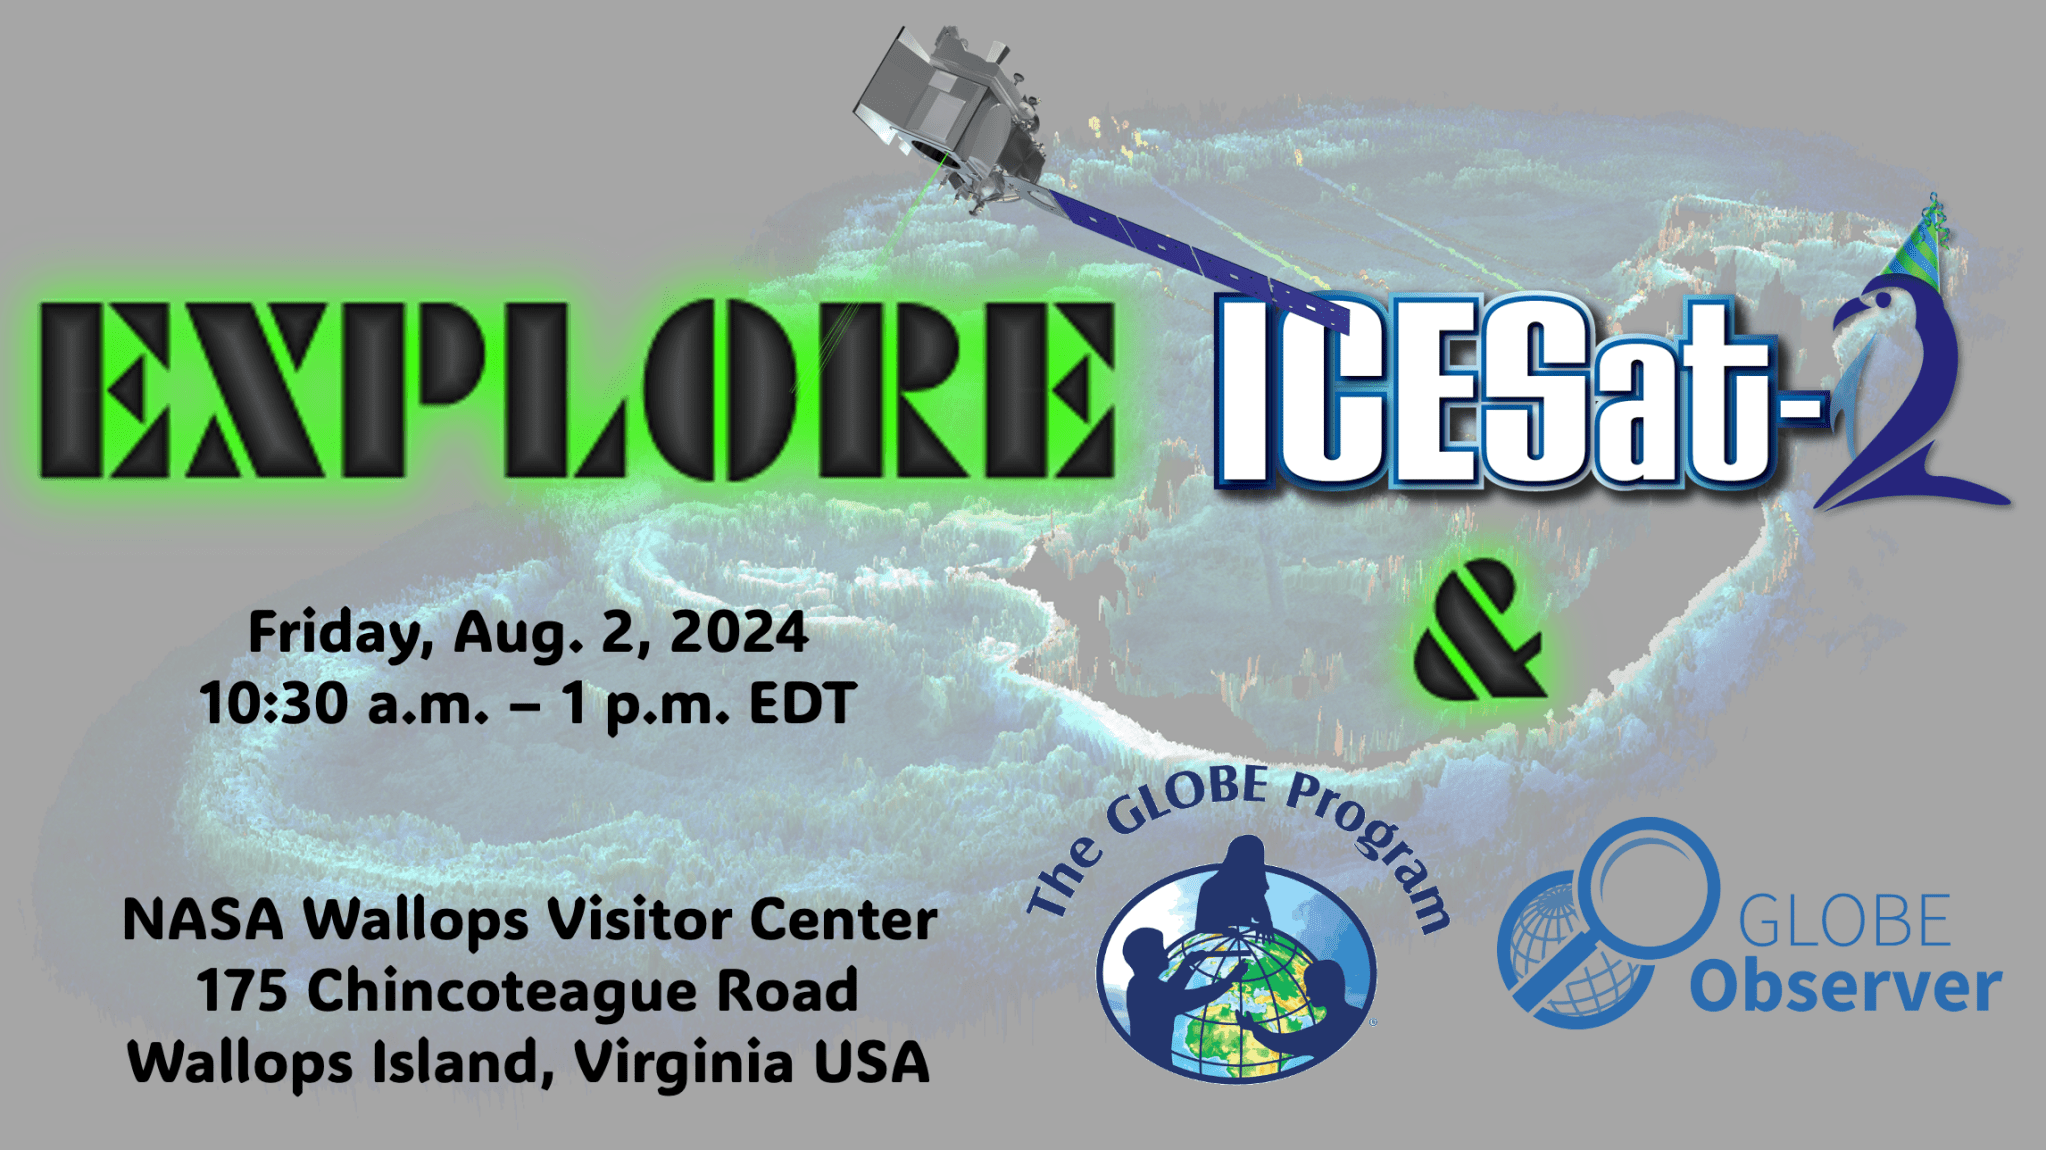 Grey background of ICESat-2 satellite collecting data. Green backlit text with black fill reads: Explore ICESat-2 (logo) & The GLOBE Program (logo) with plain black text that reads: Friday, Aug. 2, 2024 10:30 a.m. to 1 p.m. EDT at the NASA Wallops Visitor Center, 175 Chincoteague Rd. Wallops Island VA